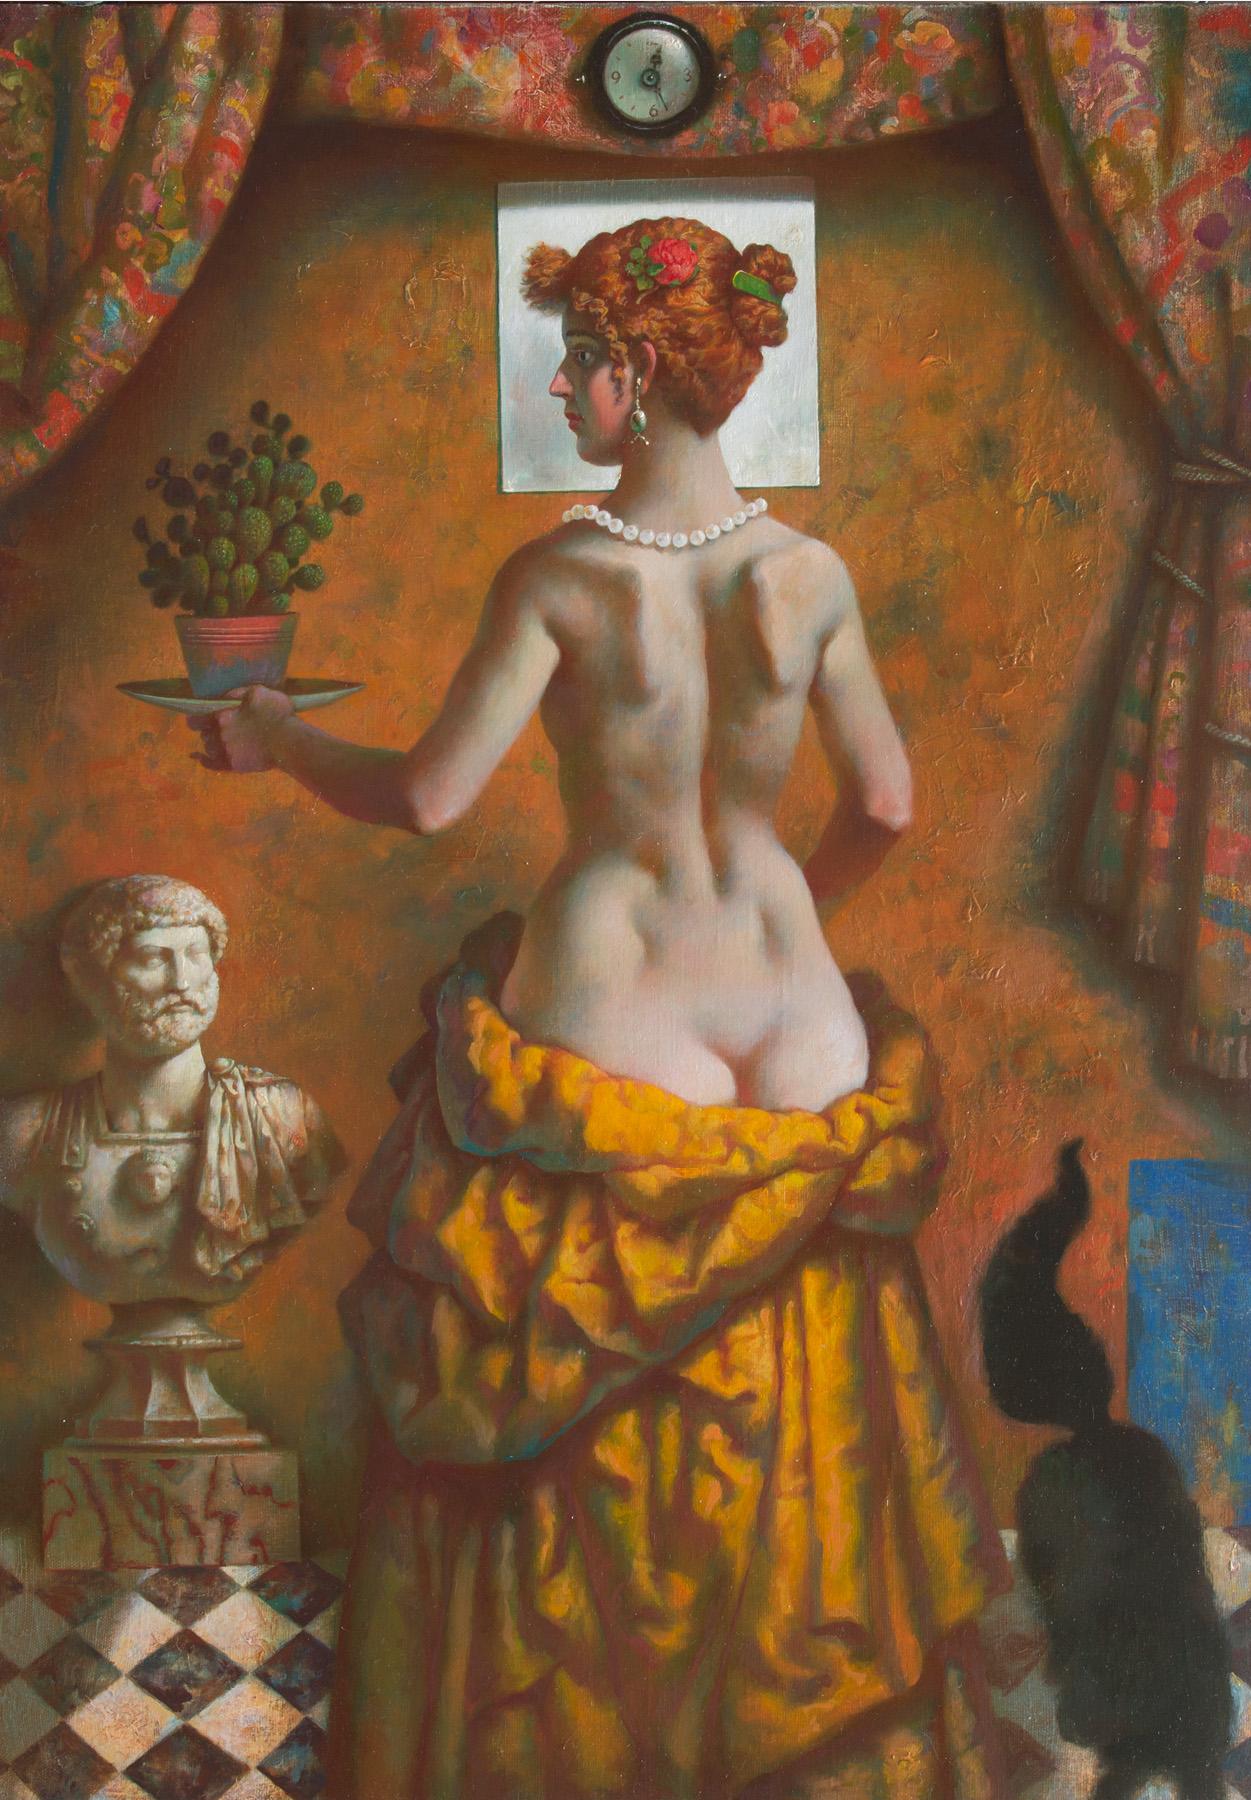 Nude with cactus